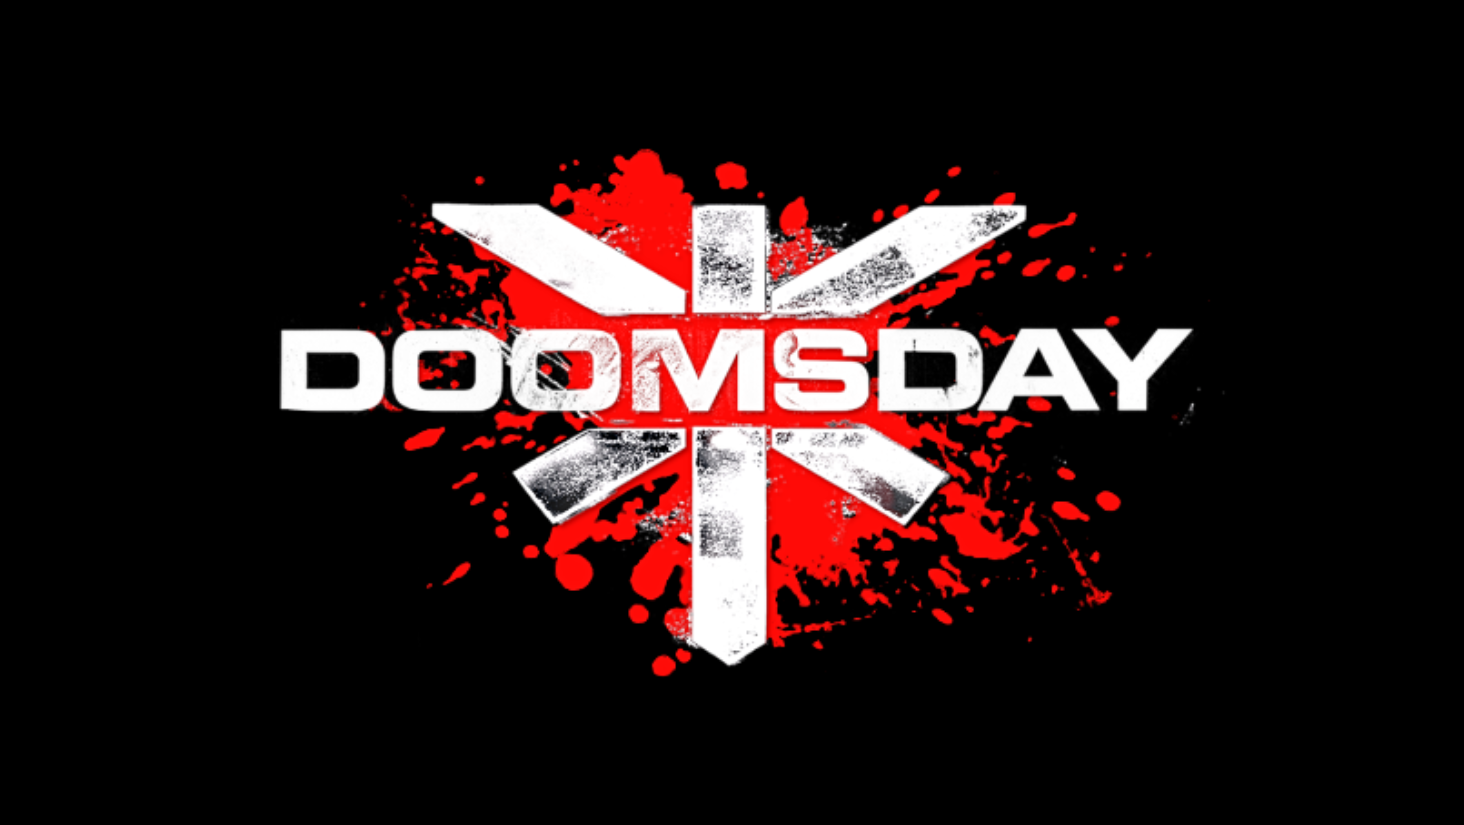 DOOMSDAY (2008) Film Review: Post-apocalyptic Dystopia on Coke